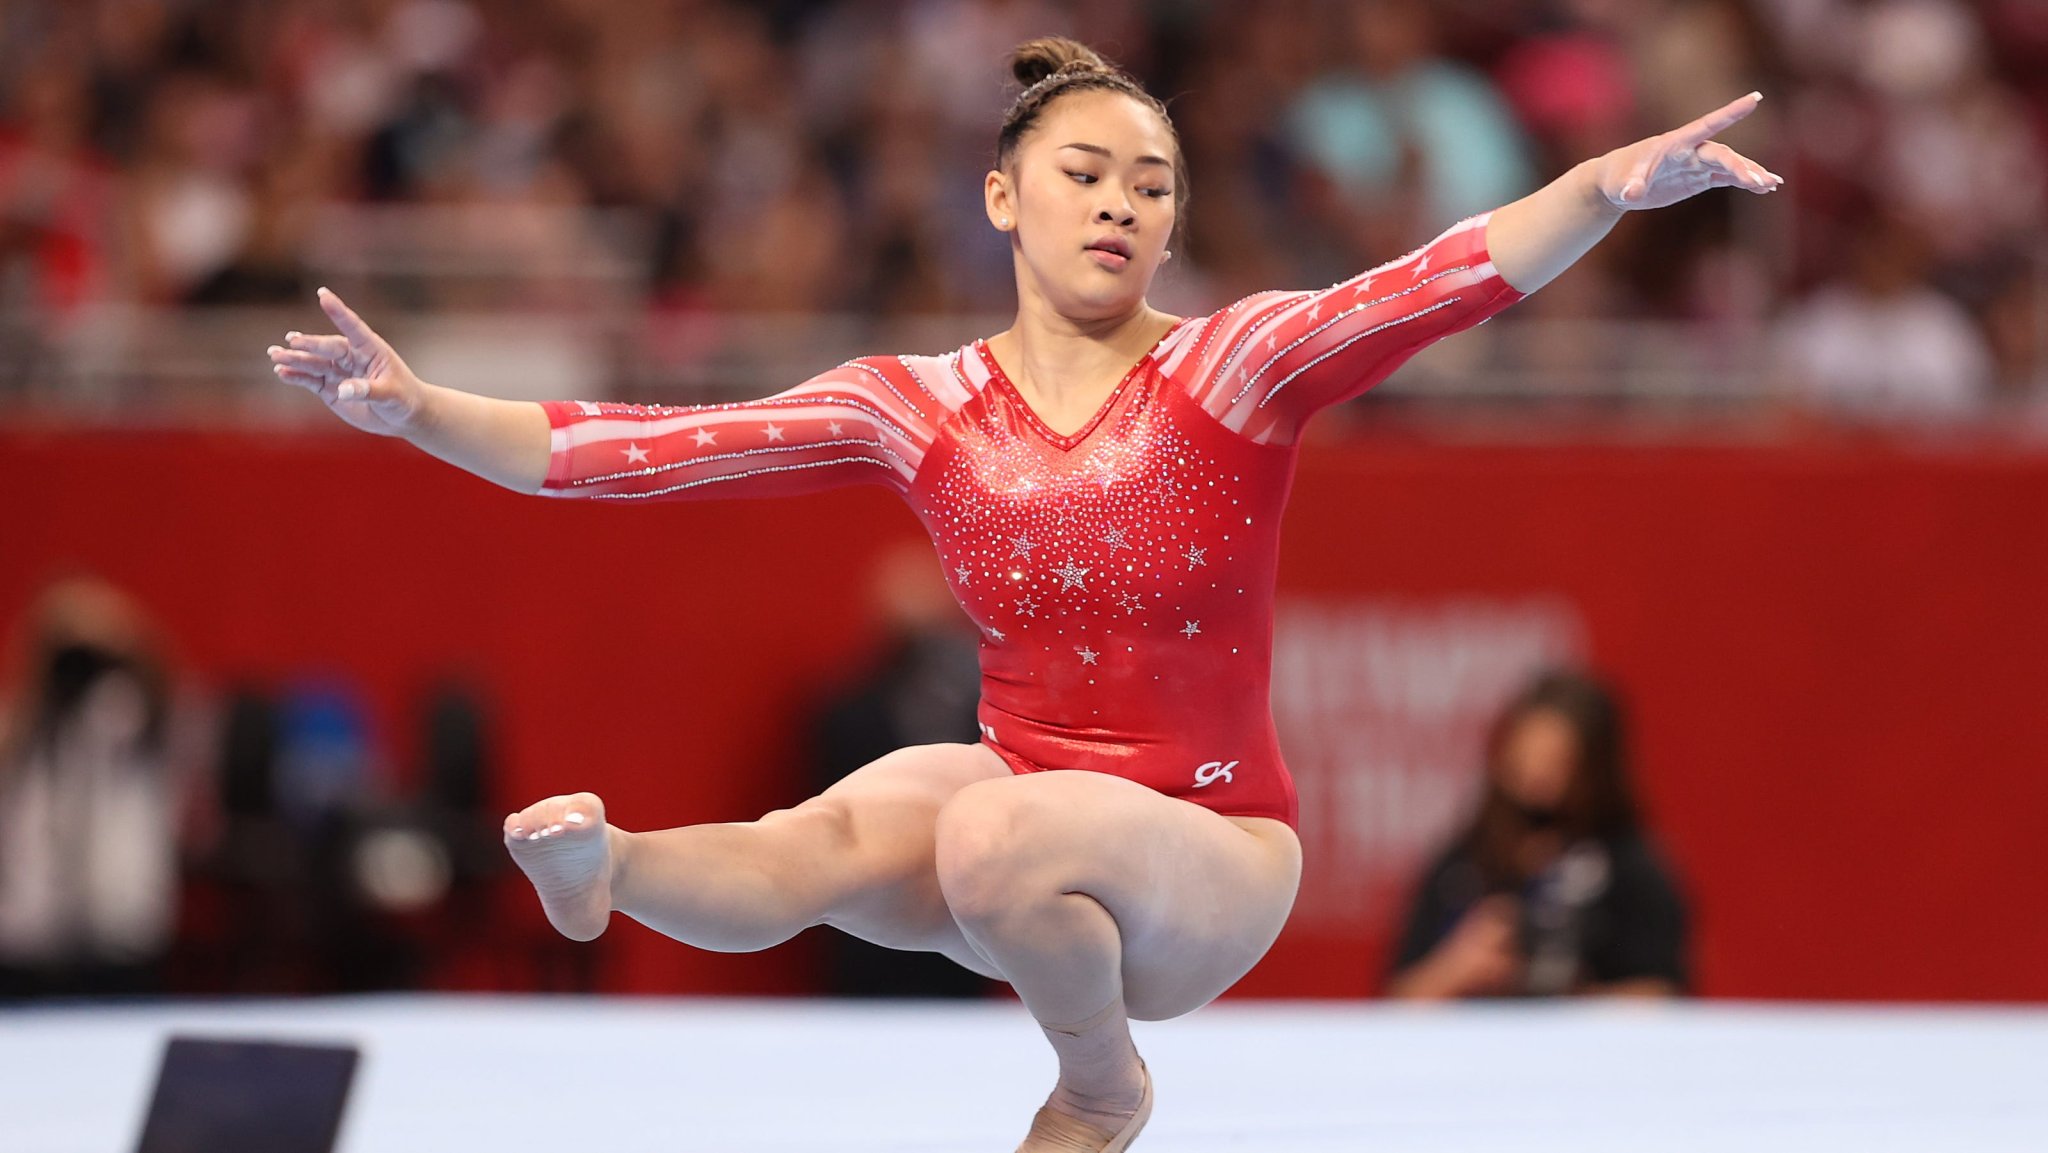 Suni Lee going to Tokyo Olympics after rare win over Simone Biles on Sunday at US gymnastics qualifying